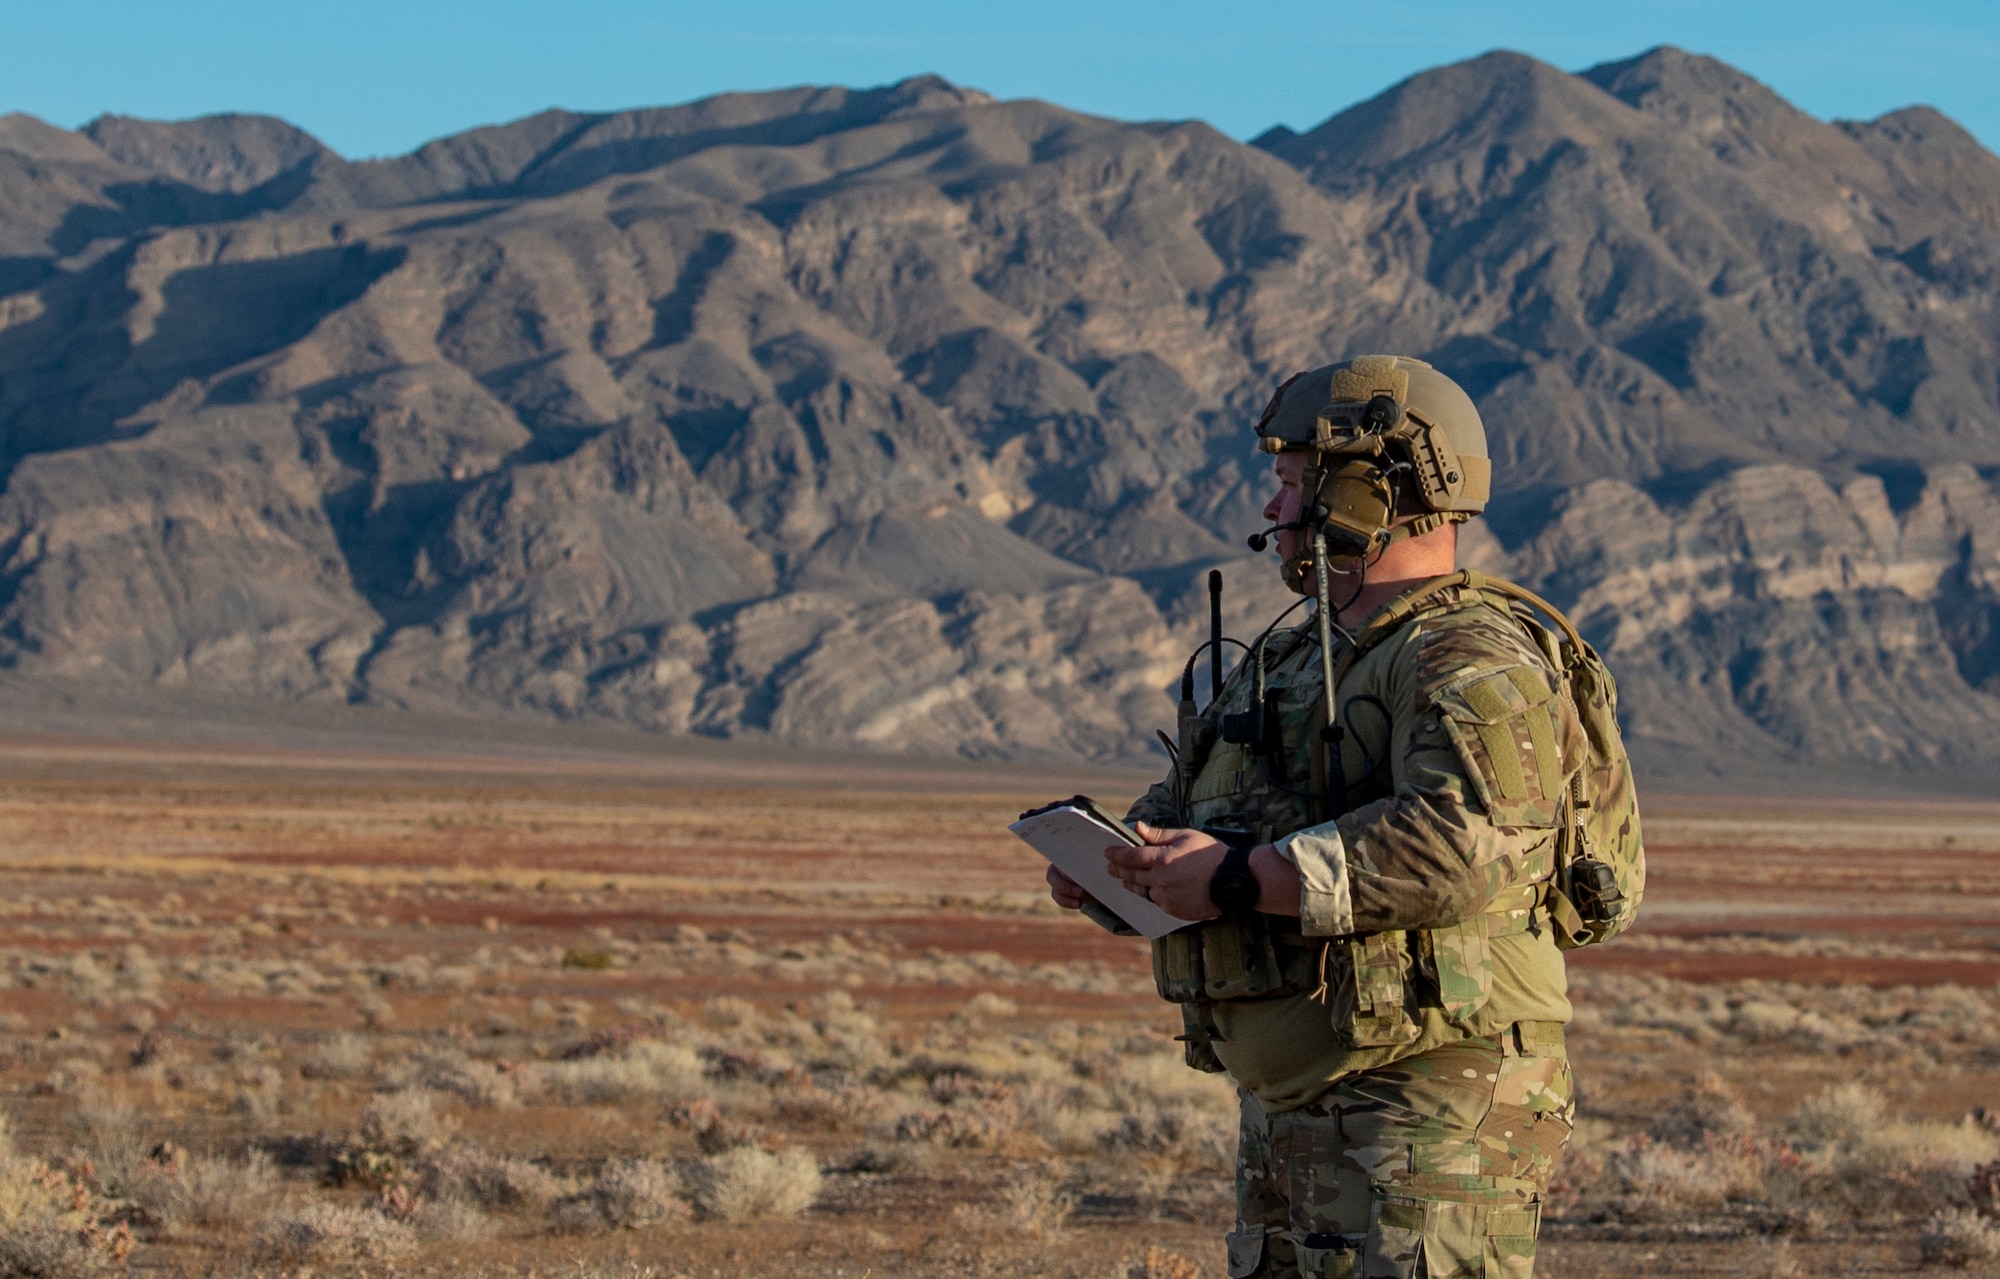 Airman stands in the middle of a range.